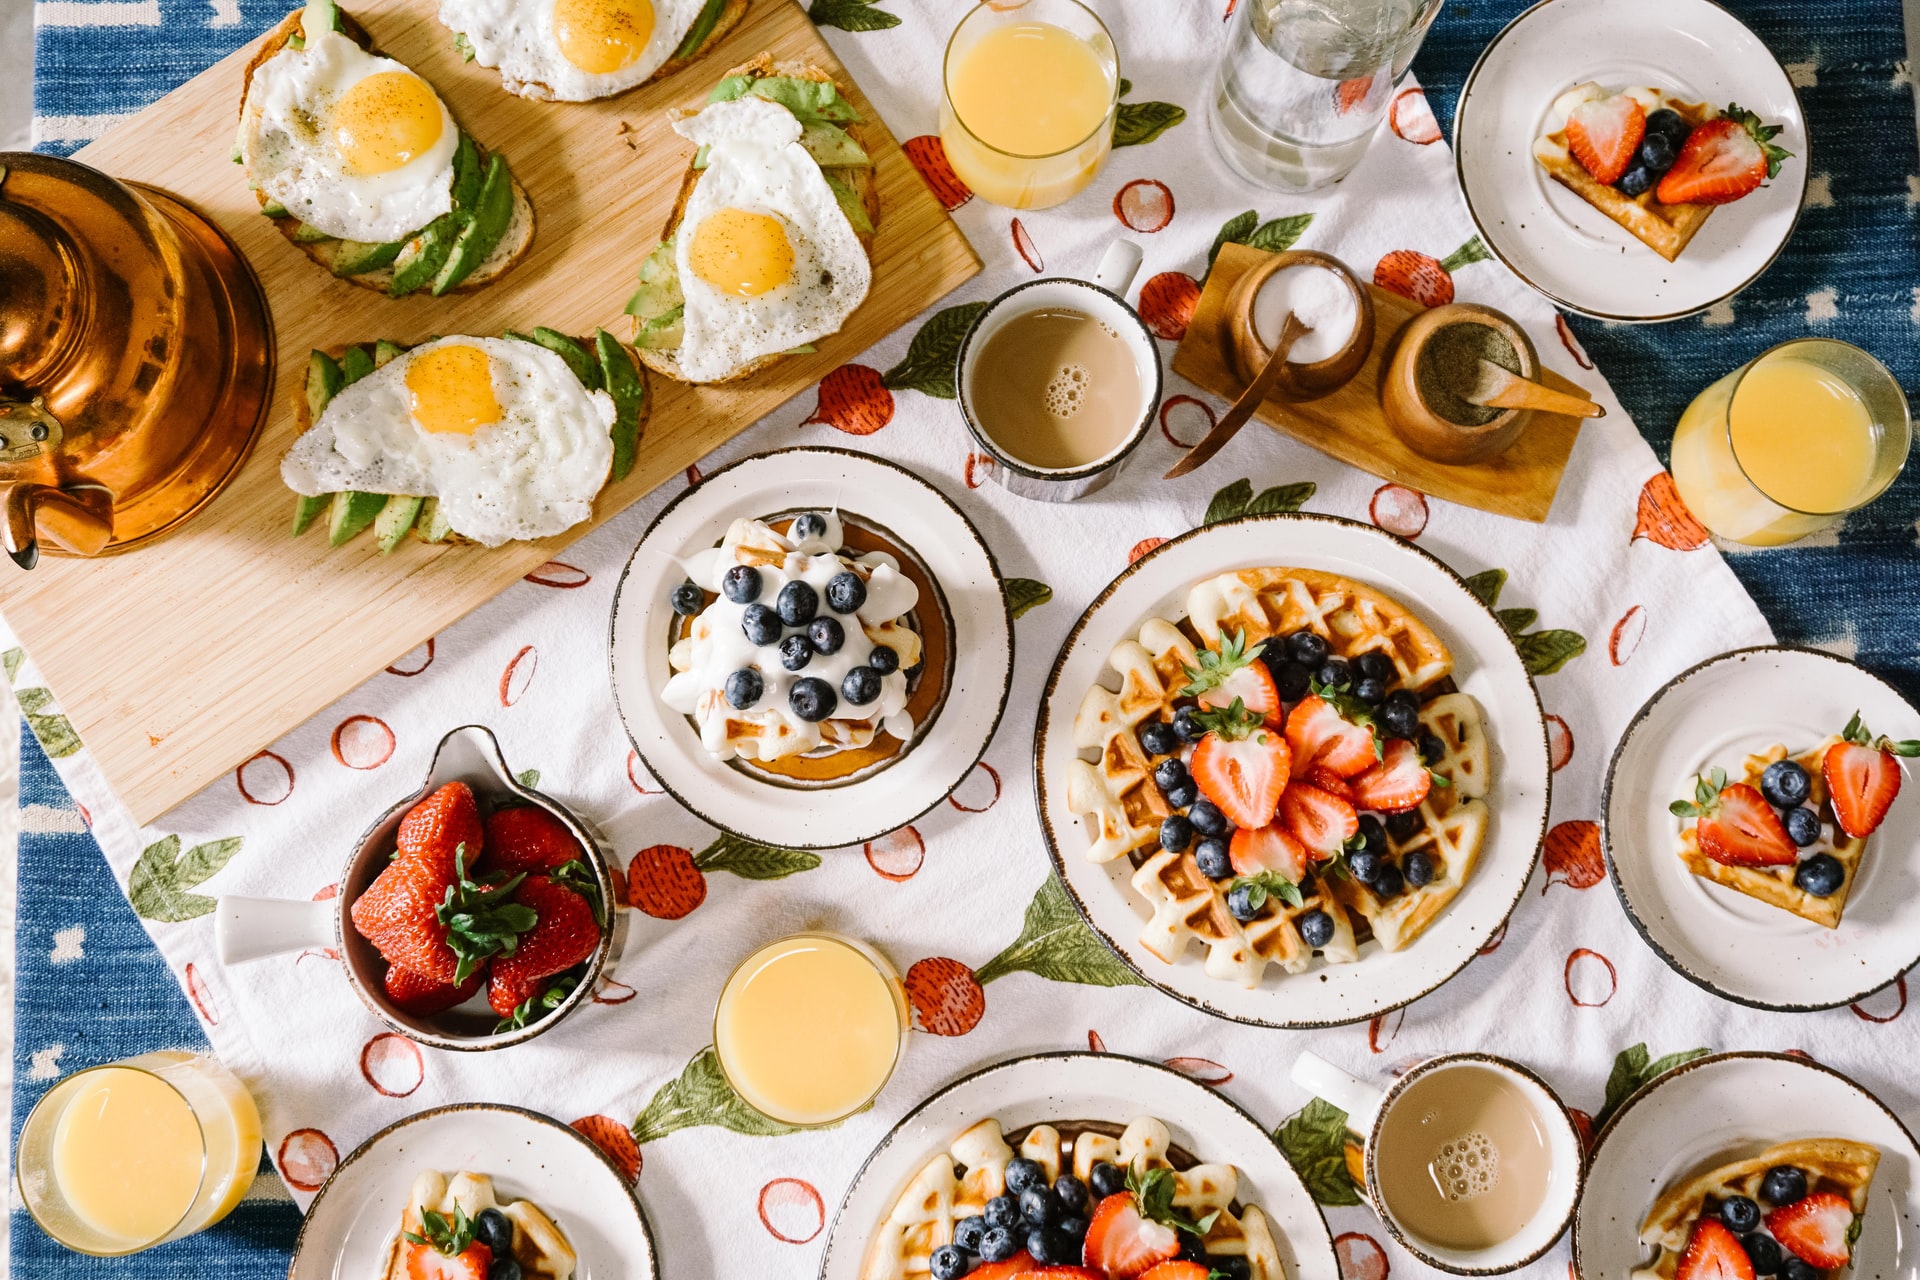 Unique Brunch Recipes to Make This Father’s Day